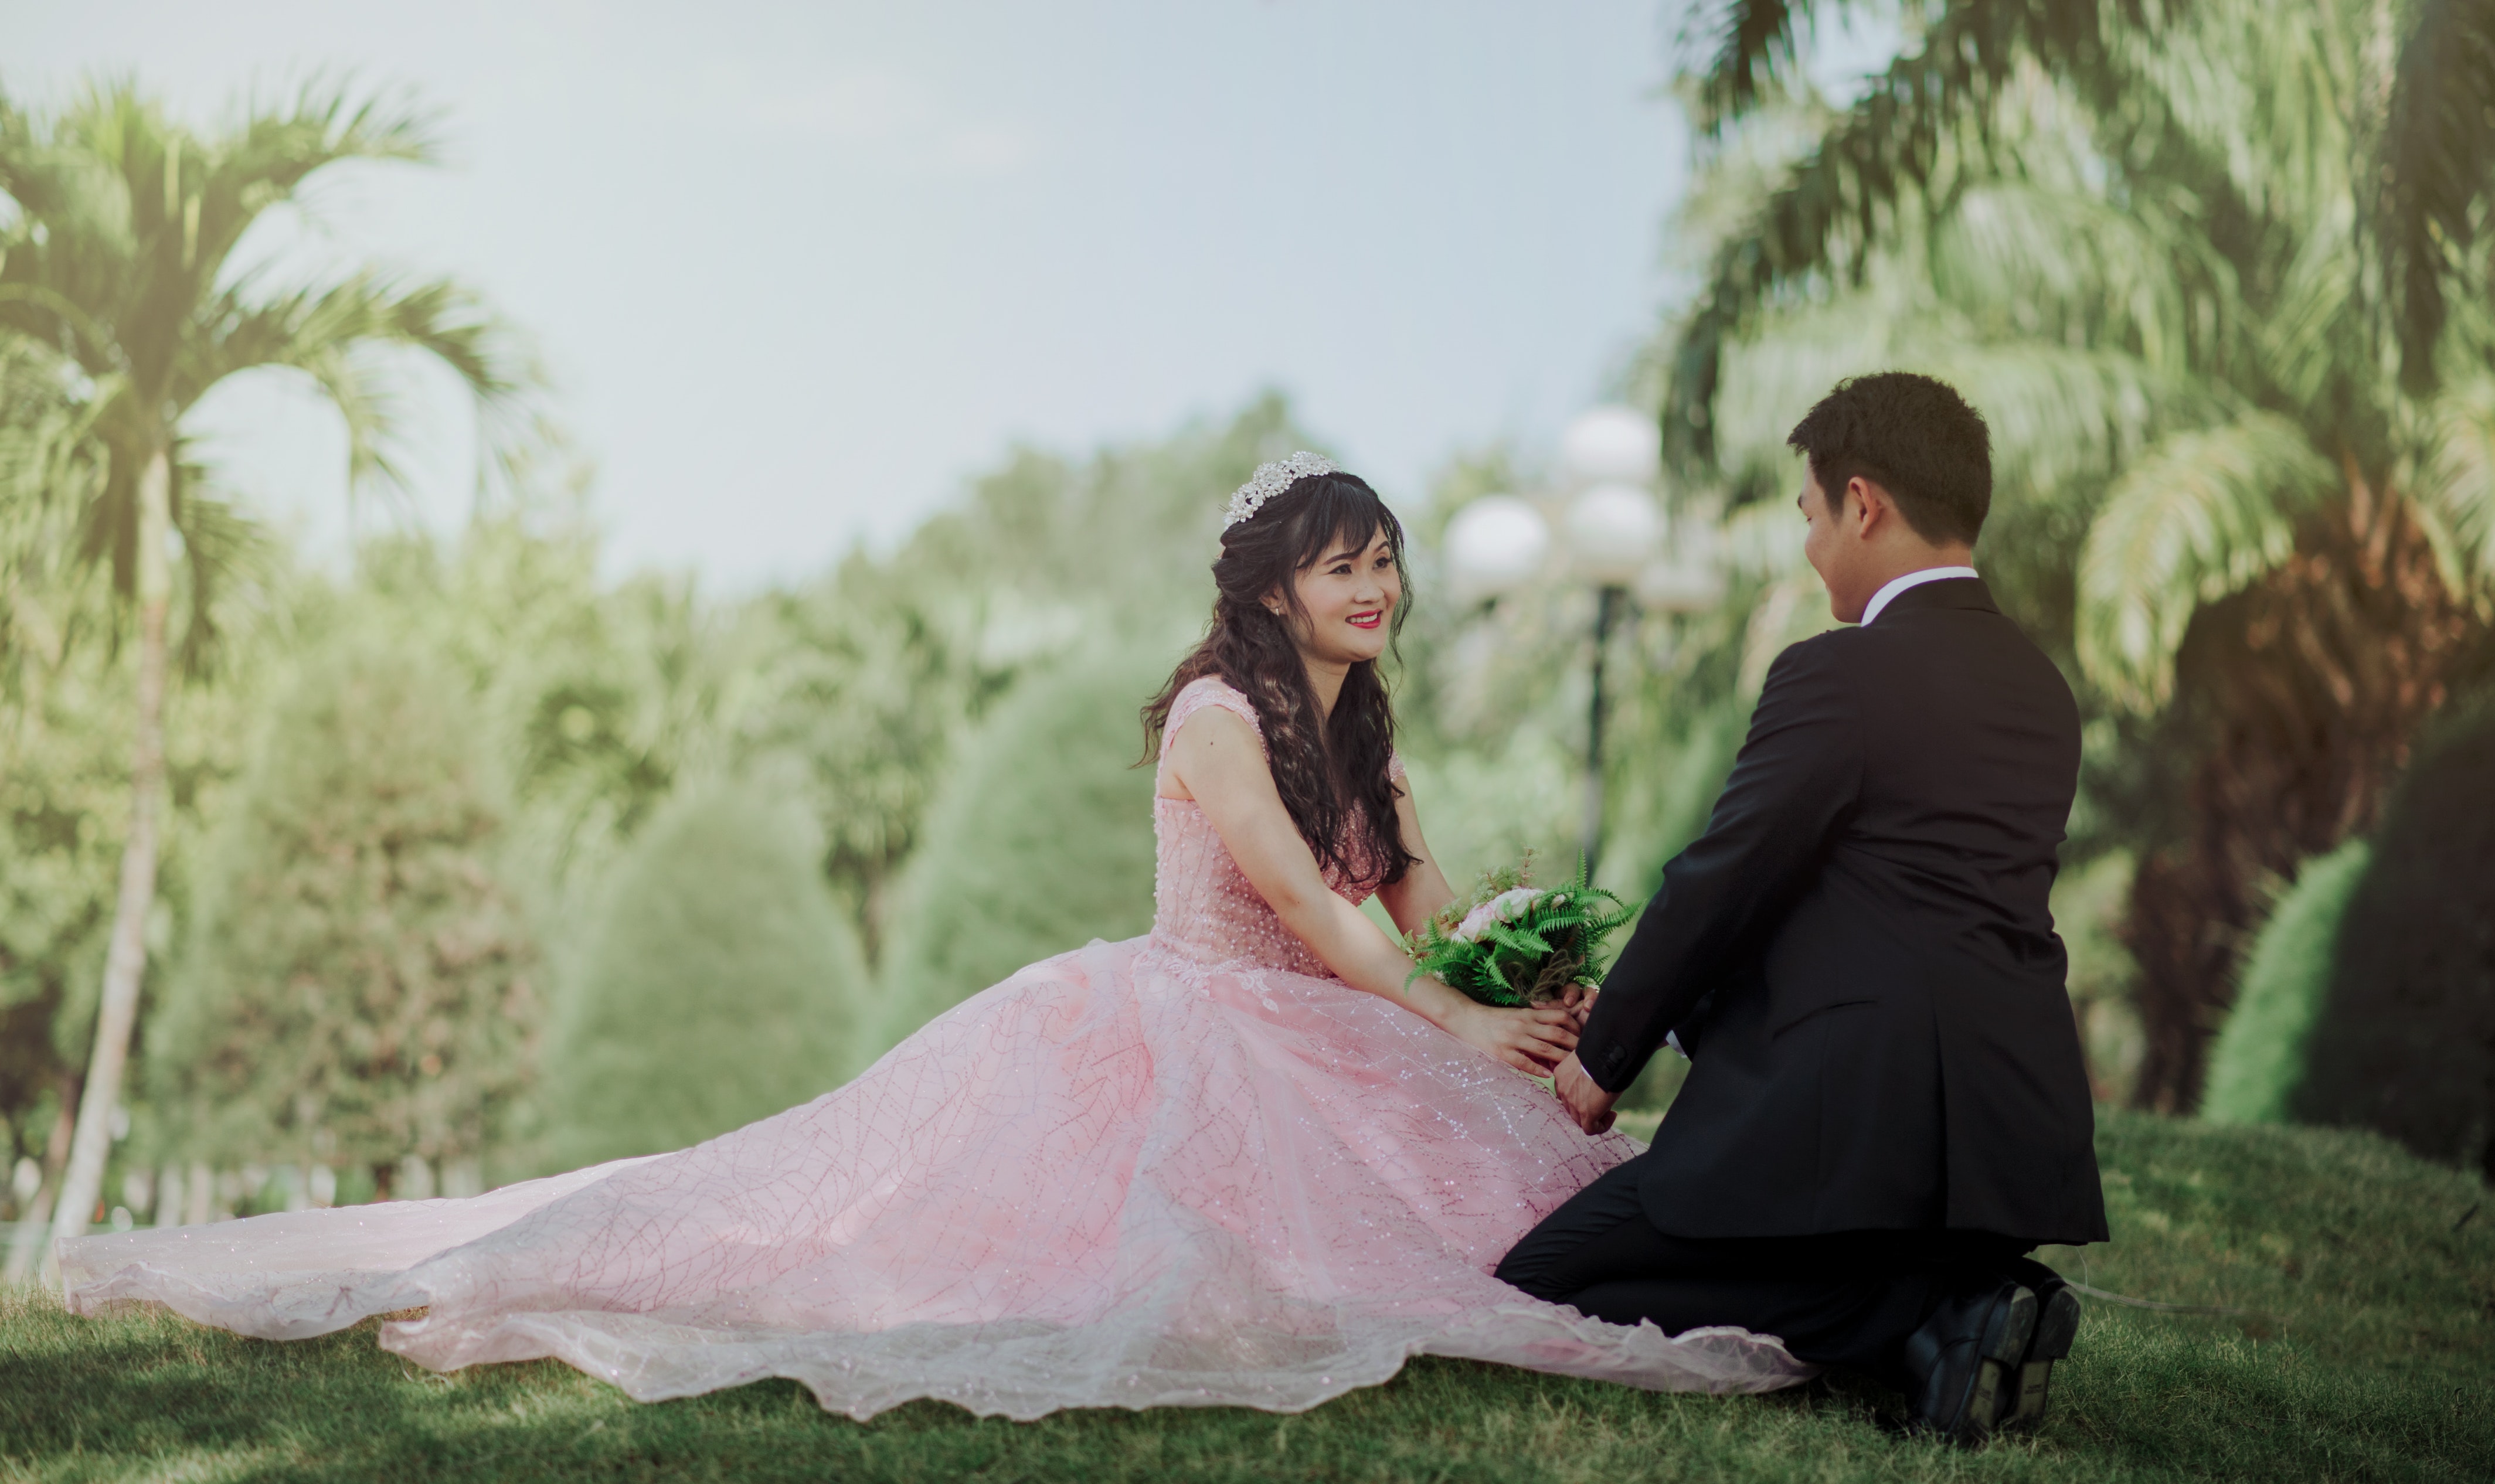 Couple Sitting on Grass, Adult, Smiling, Photoshoot, Portrait, HQ Photo